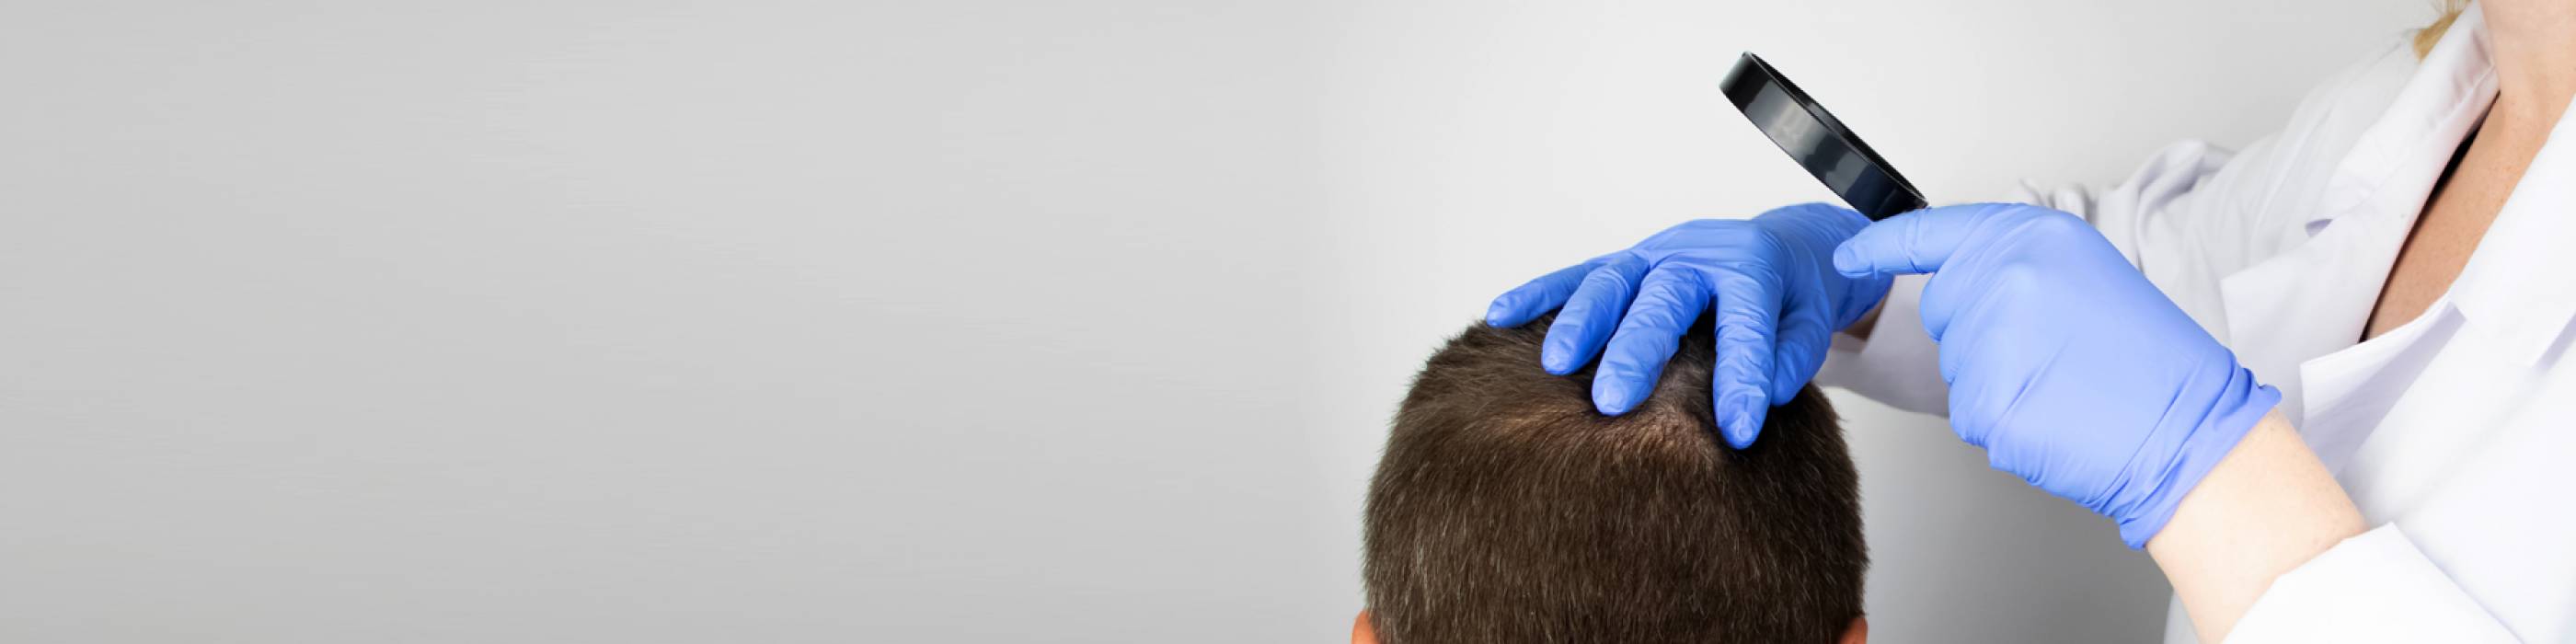 A close-up of a doctor examining the scalp of a man using a magnifier to treat any hair loss or balding patches he suffers from